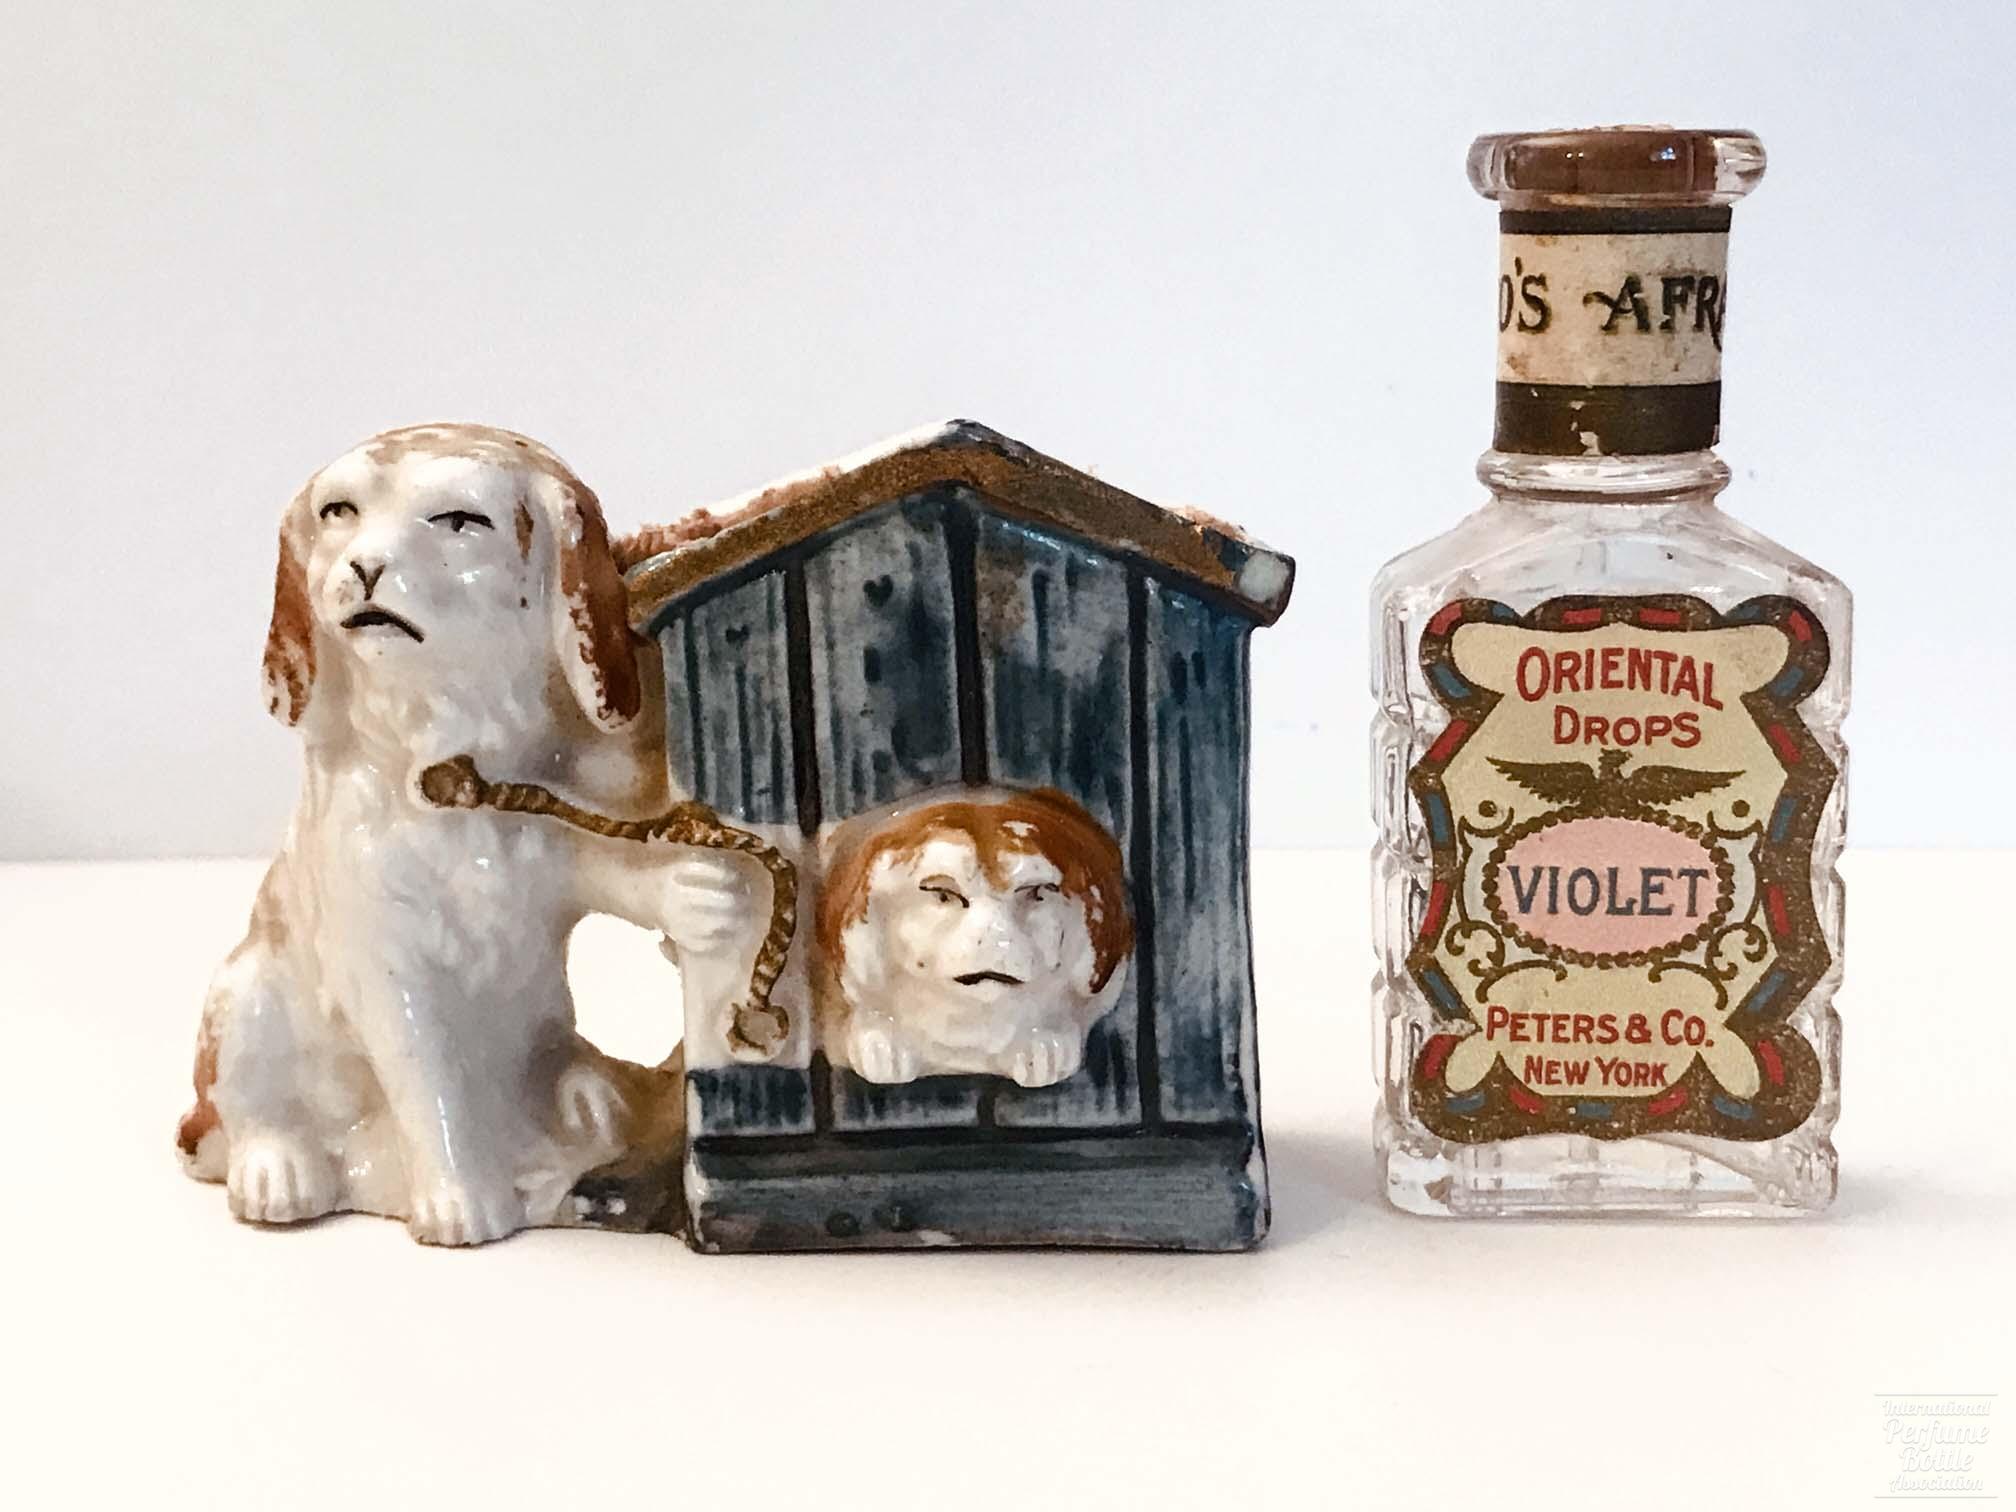 "Violet Oriental Drops" Doghouse Presentation by Peters & Co.